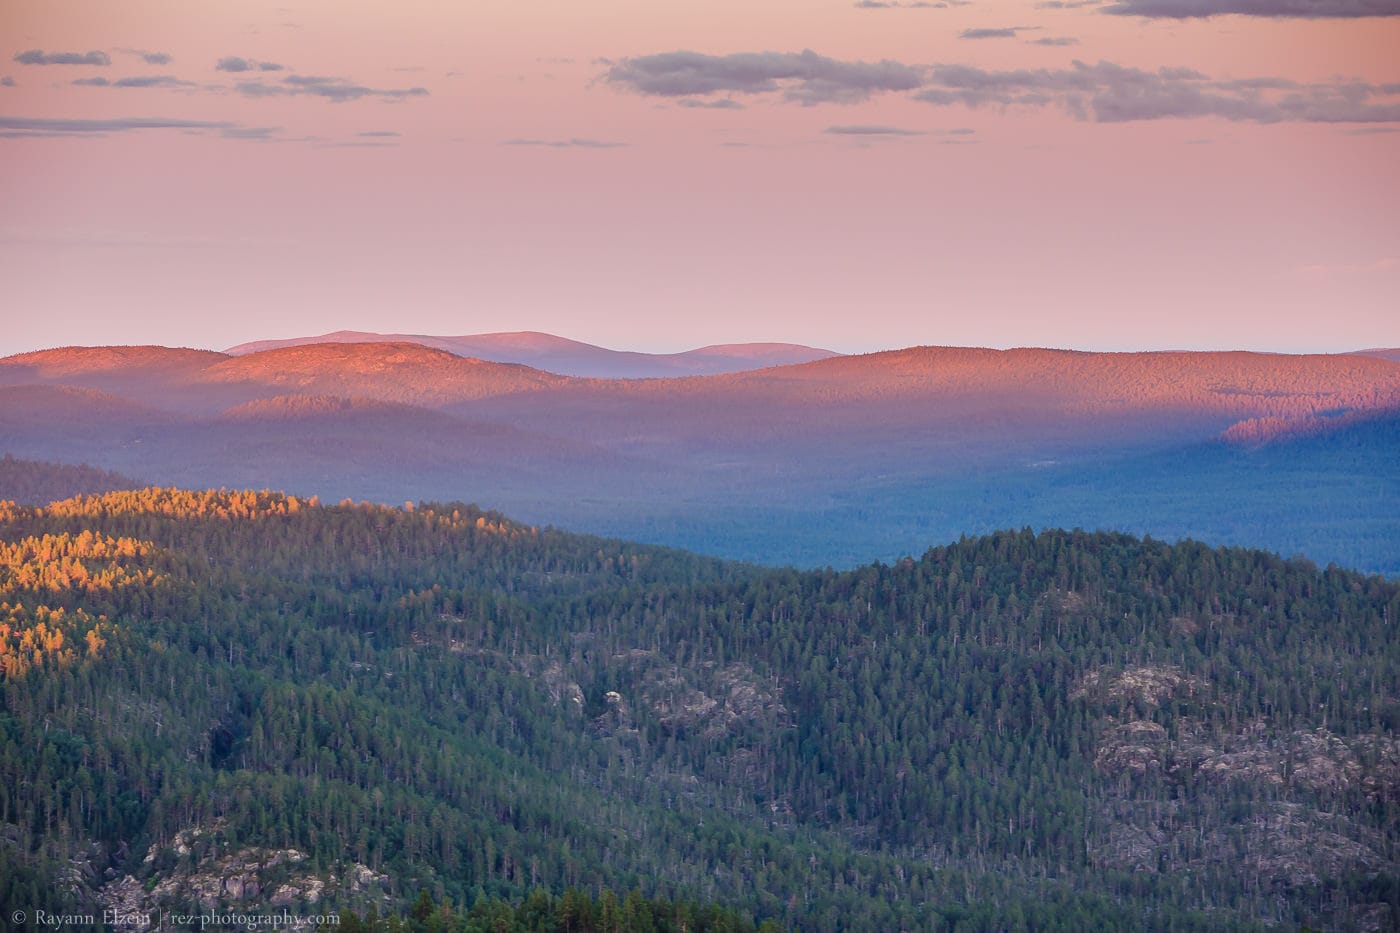 The fells of the Inari regions lit up by the warm light of the Lapland Midnight Sun